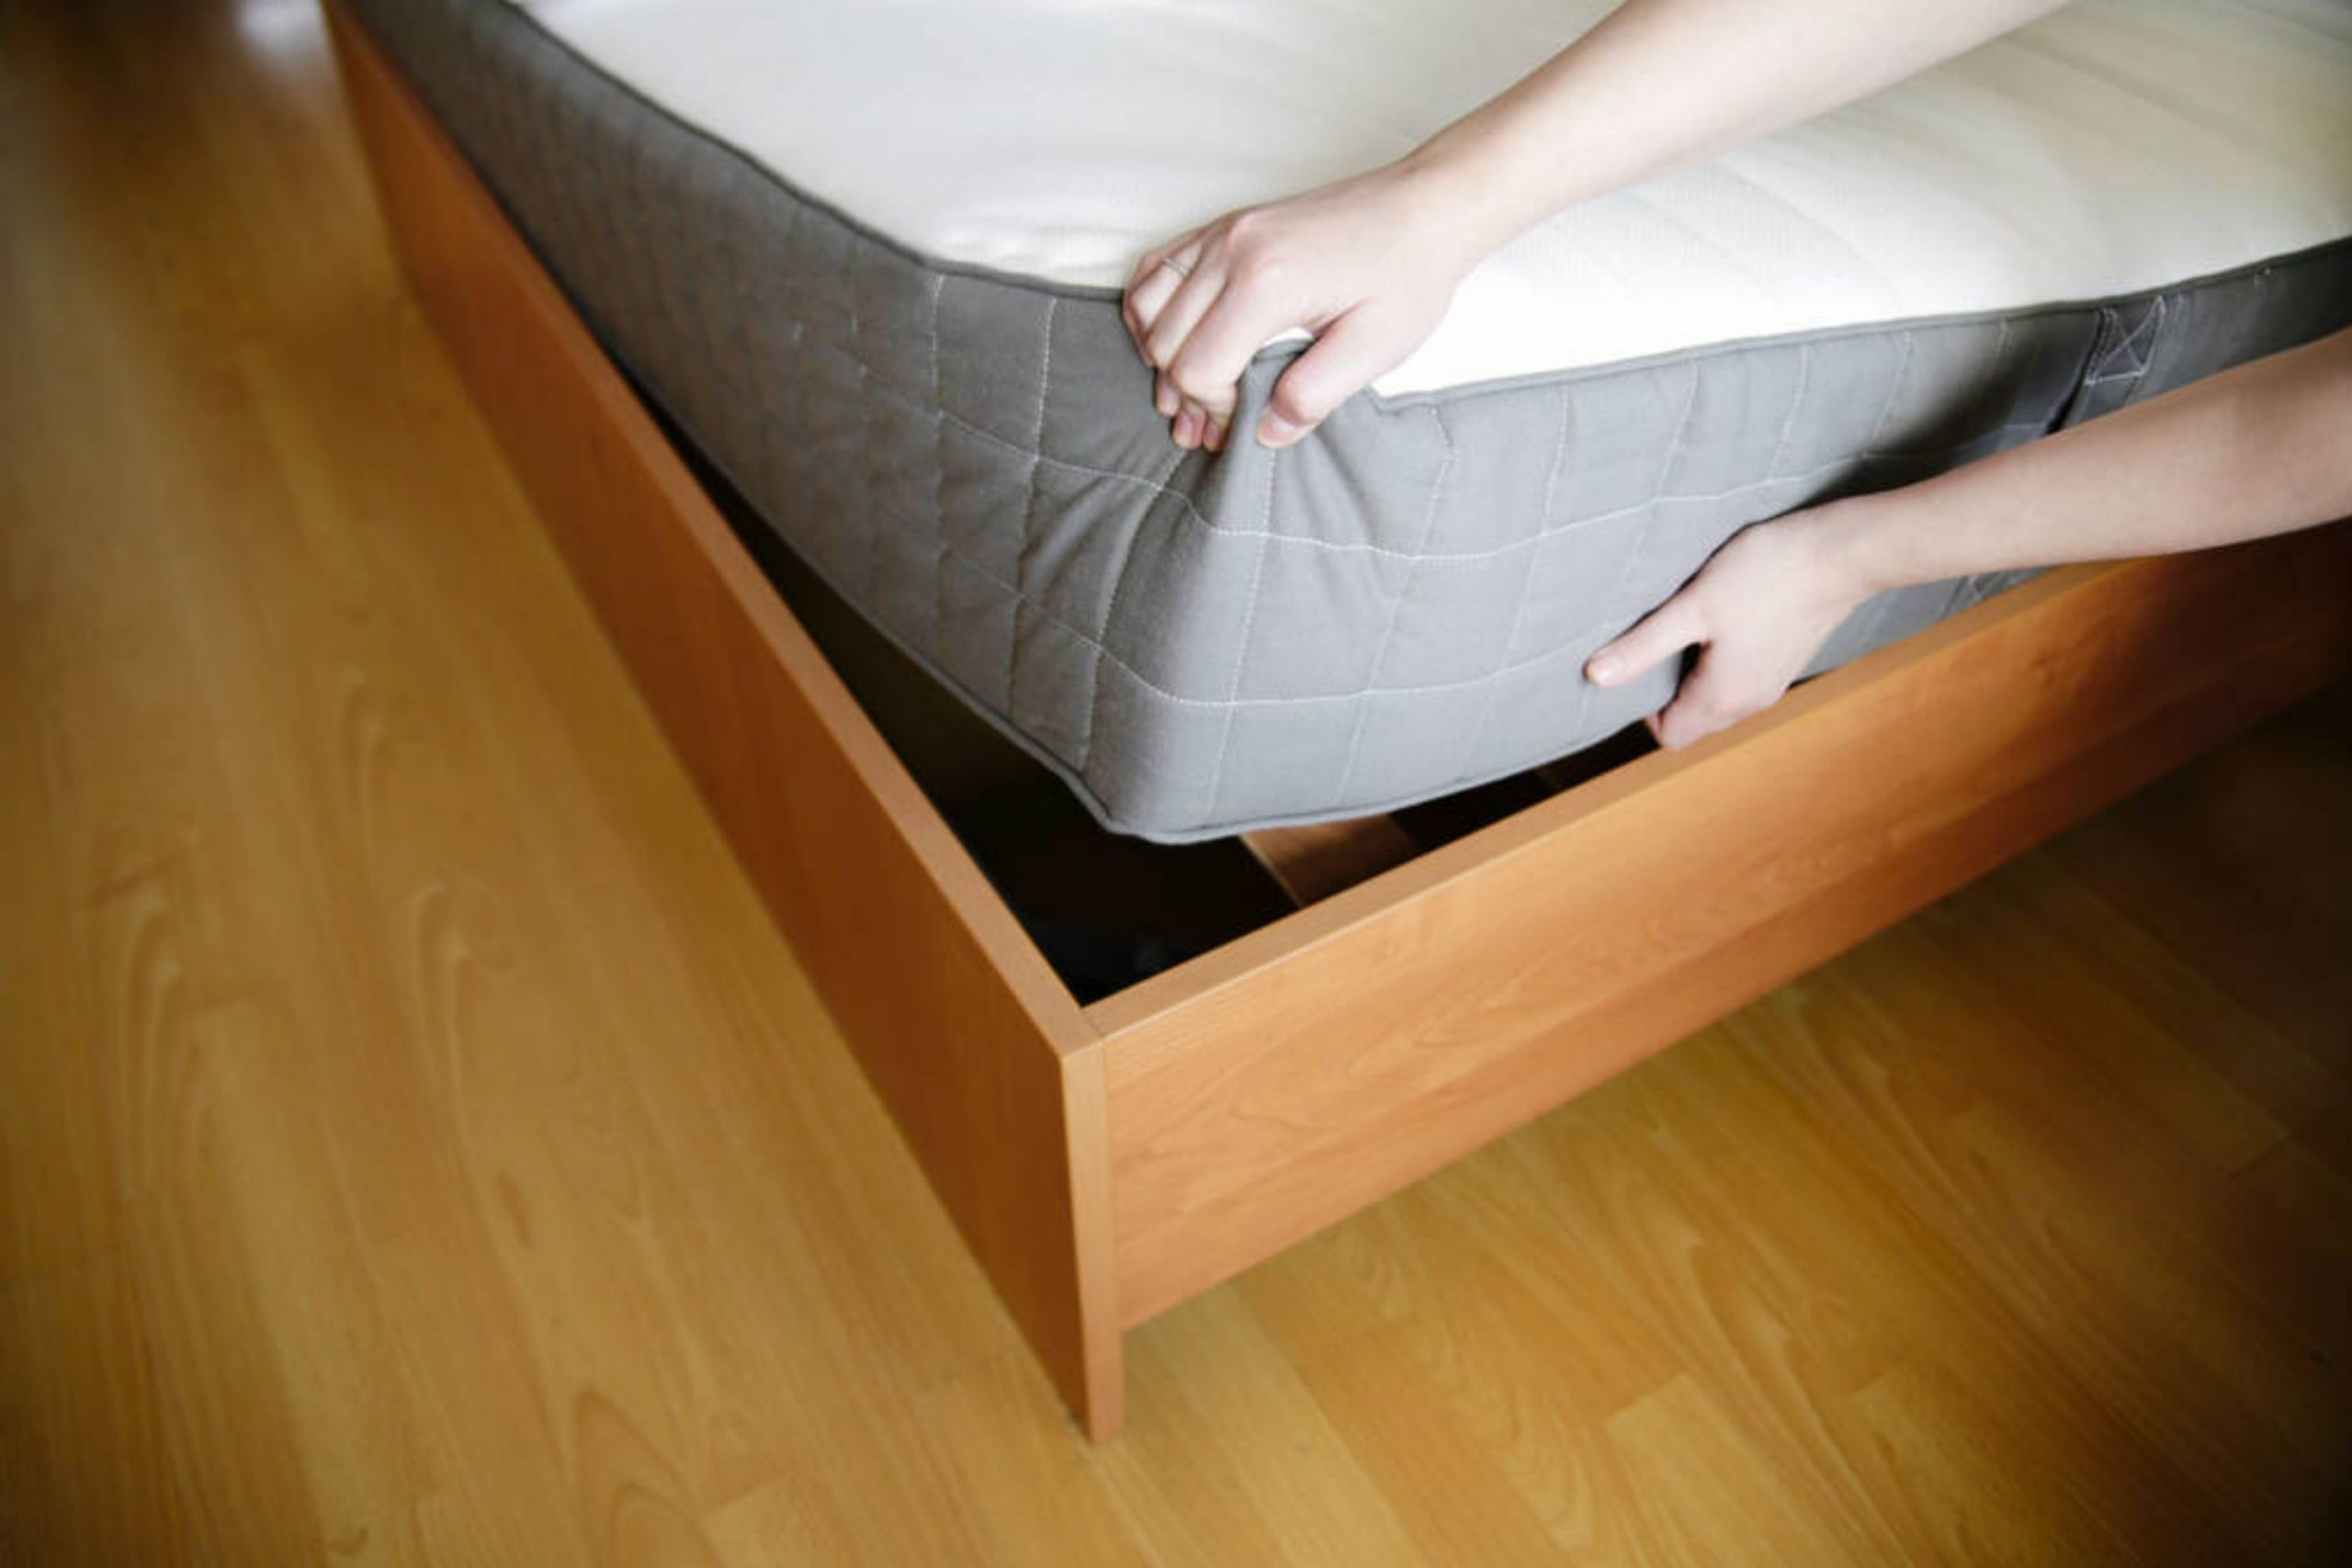 Early Signs of Bed Bugs On Mattress